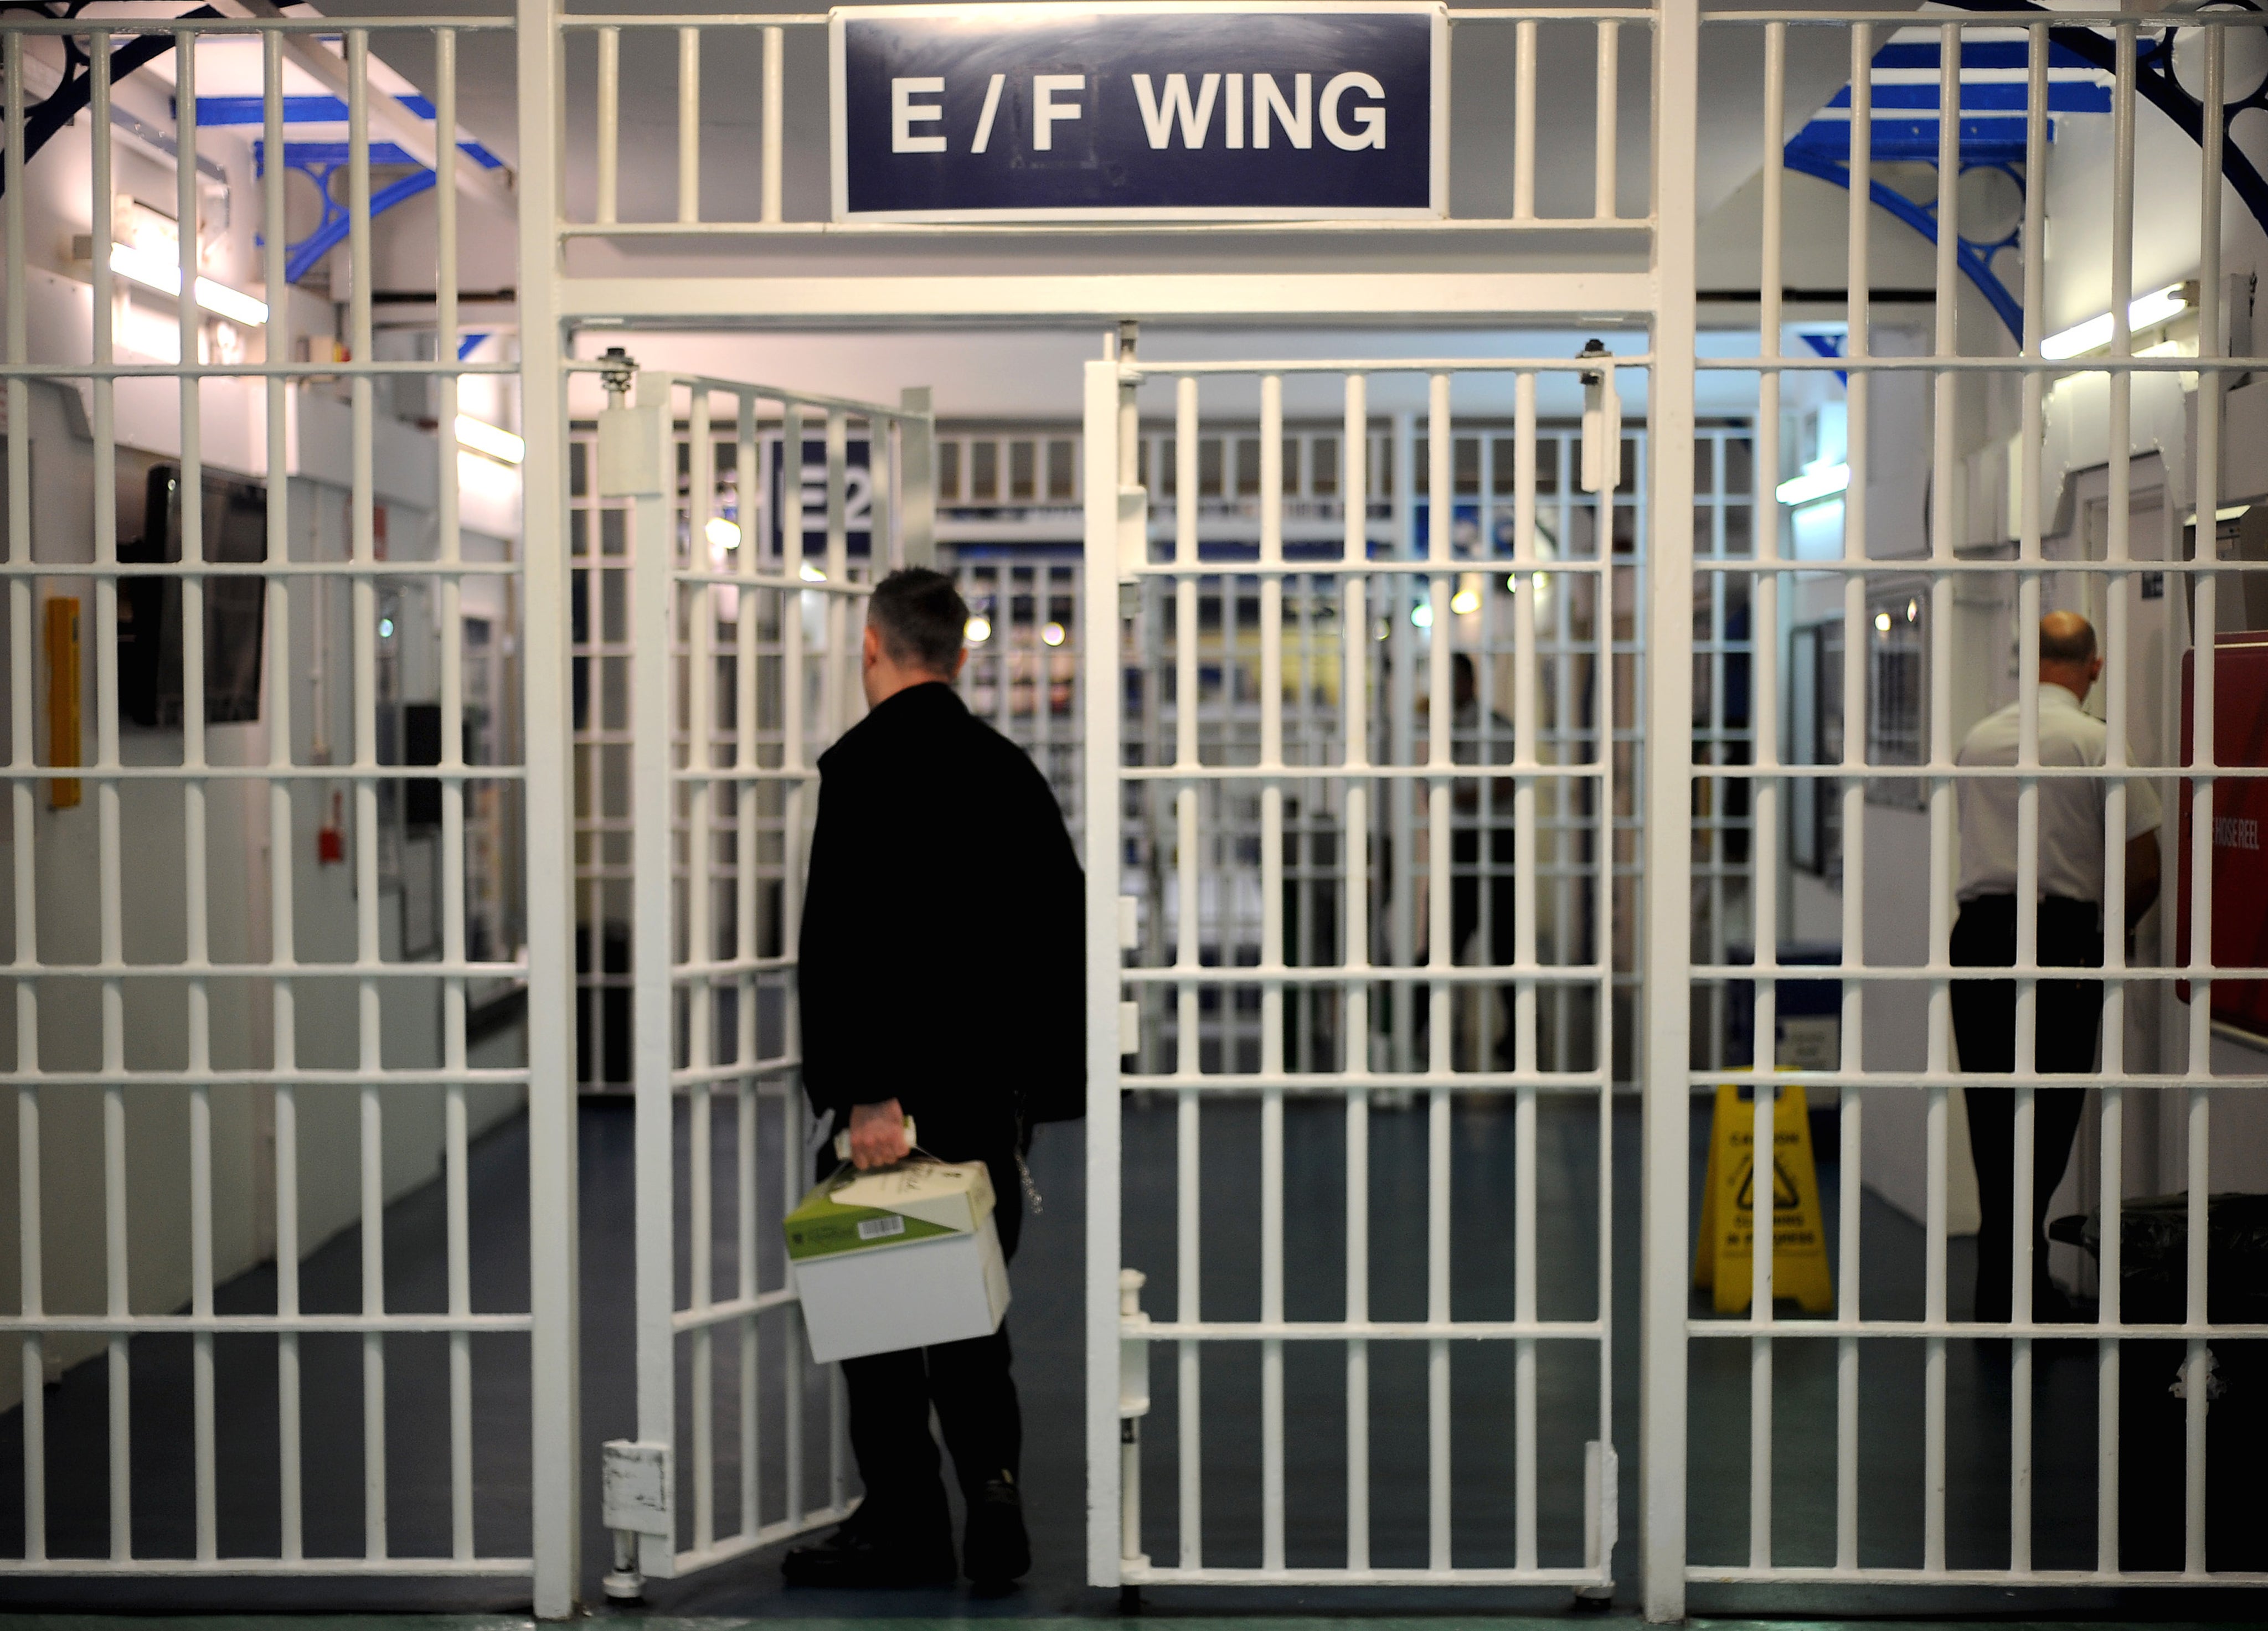 HMP Pentonville was named among the jails cramming two inmates into single Victorian cells (Anthony Devlin/PA)